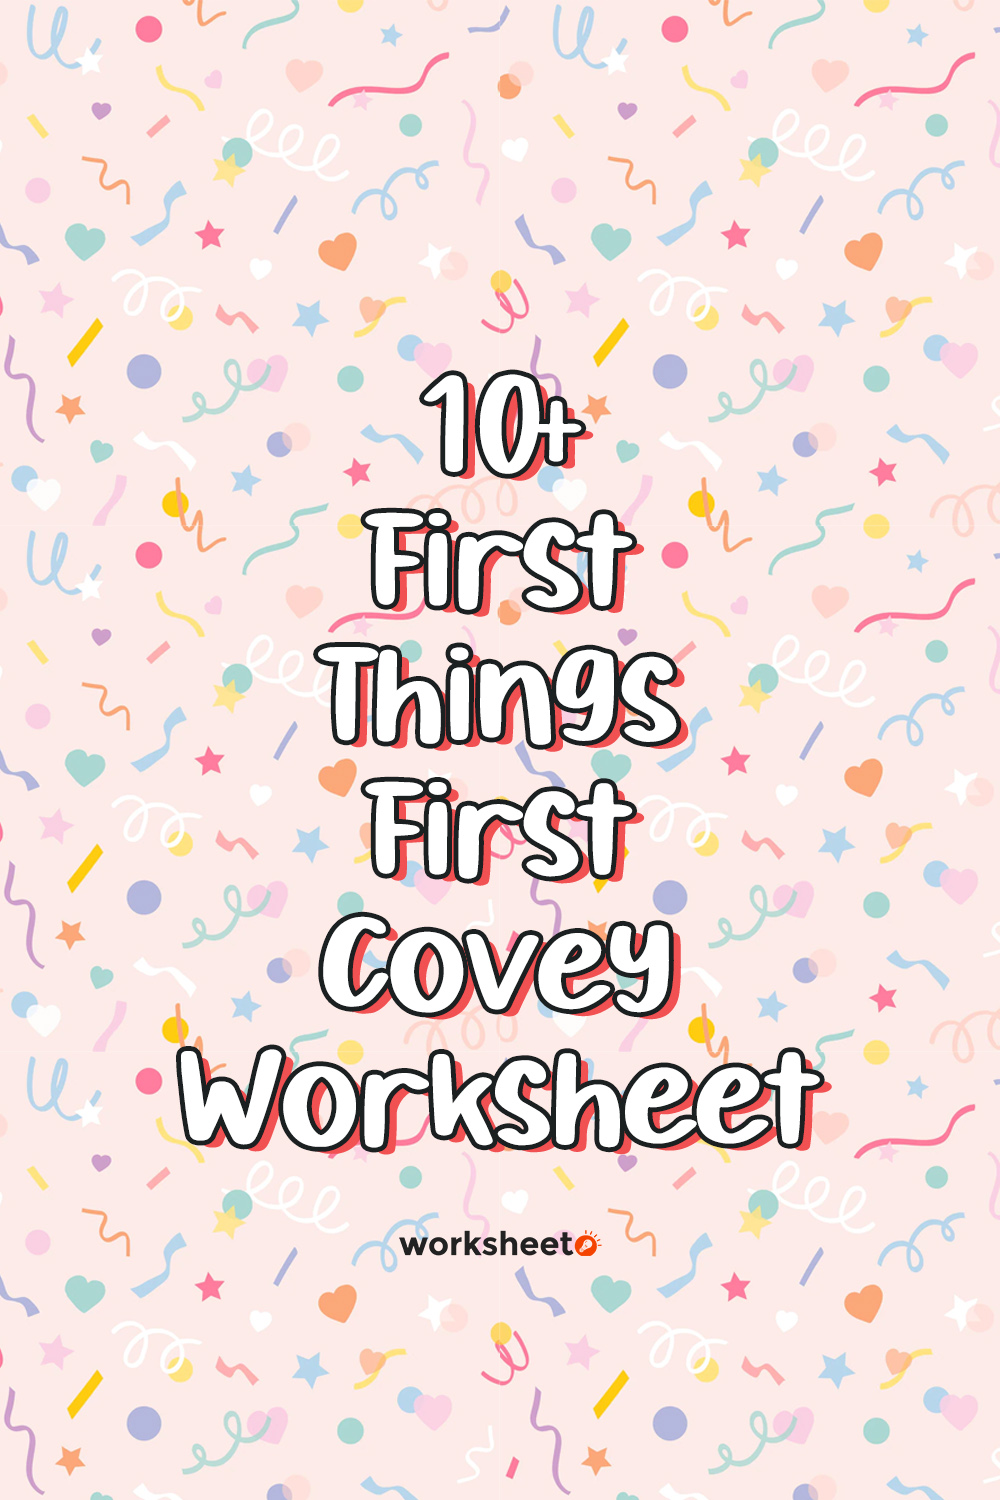 First Things First Covey Worksheet